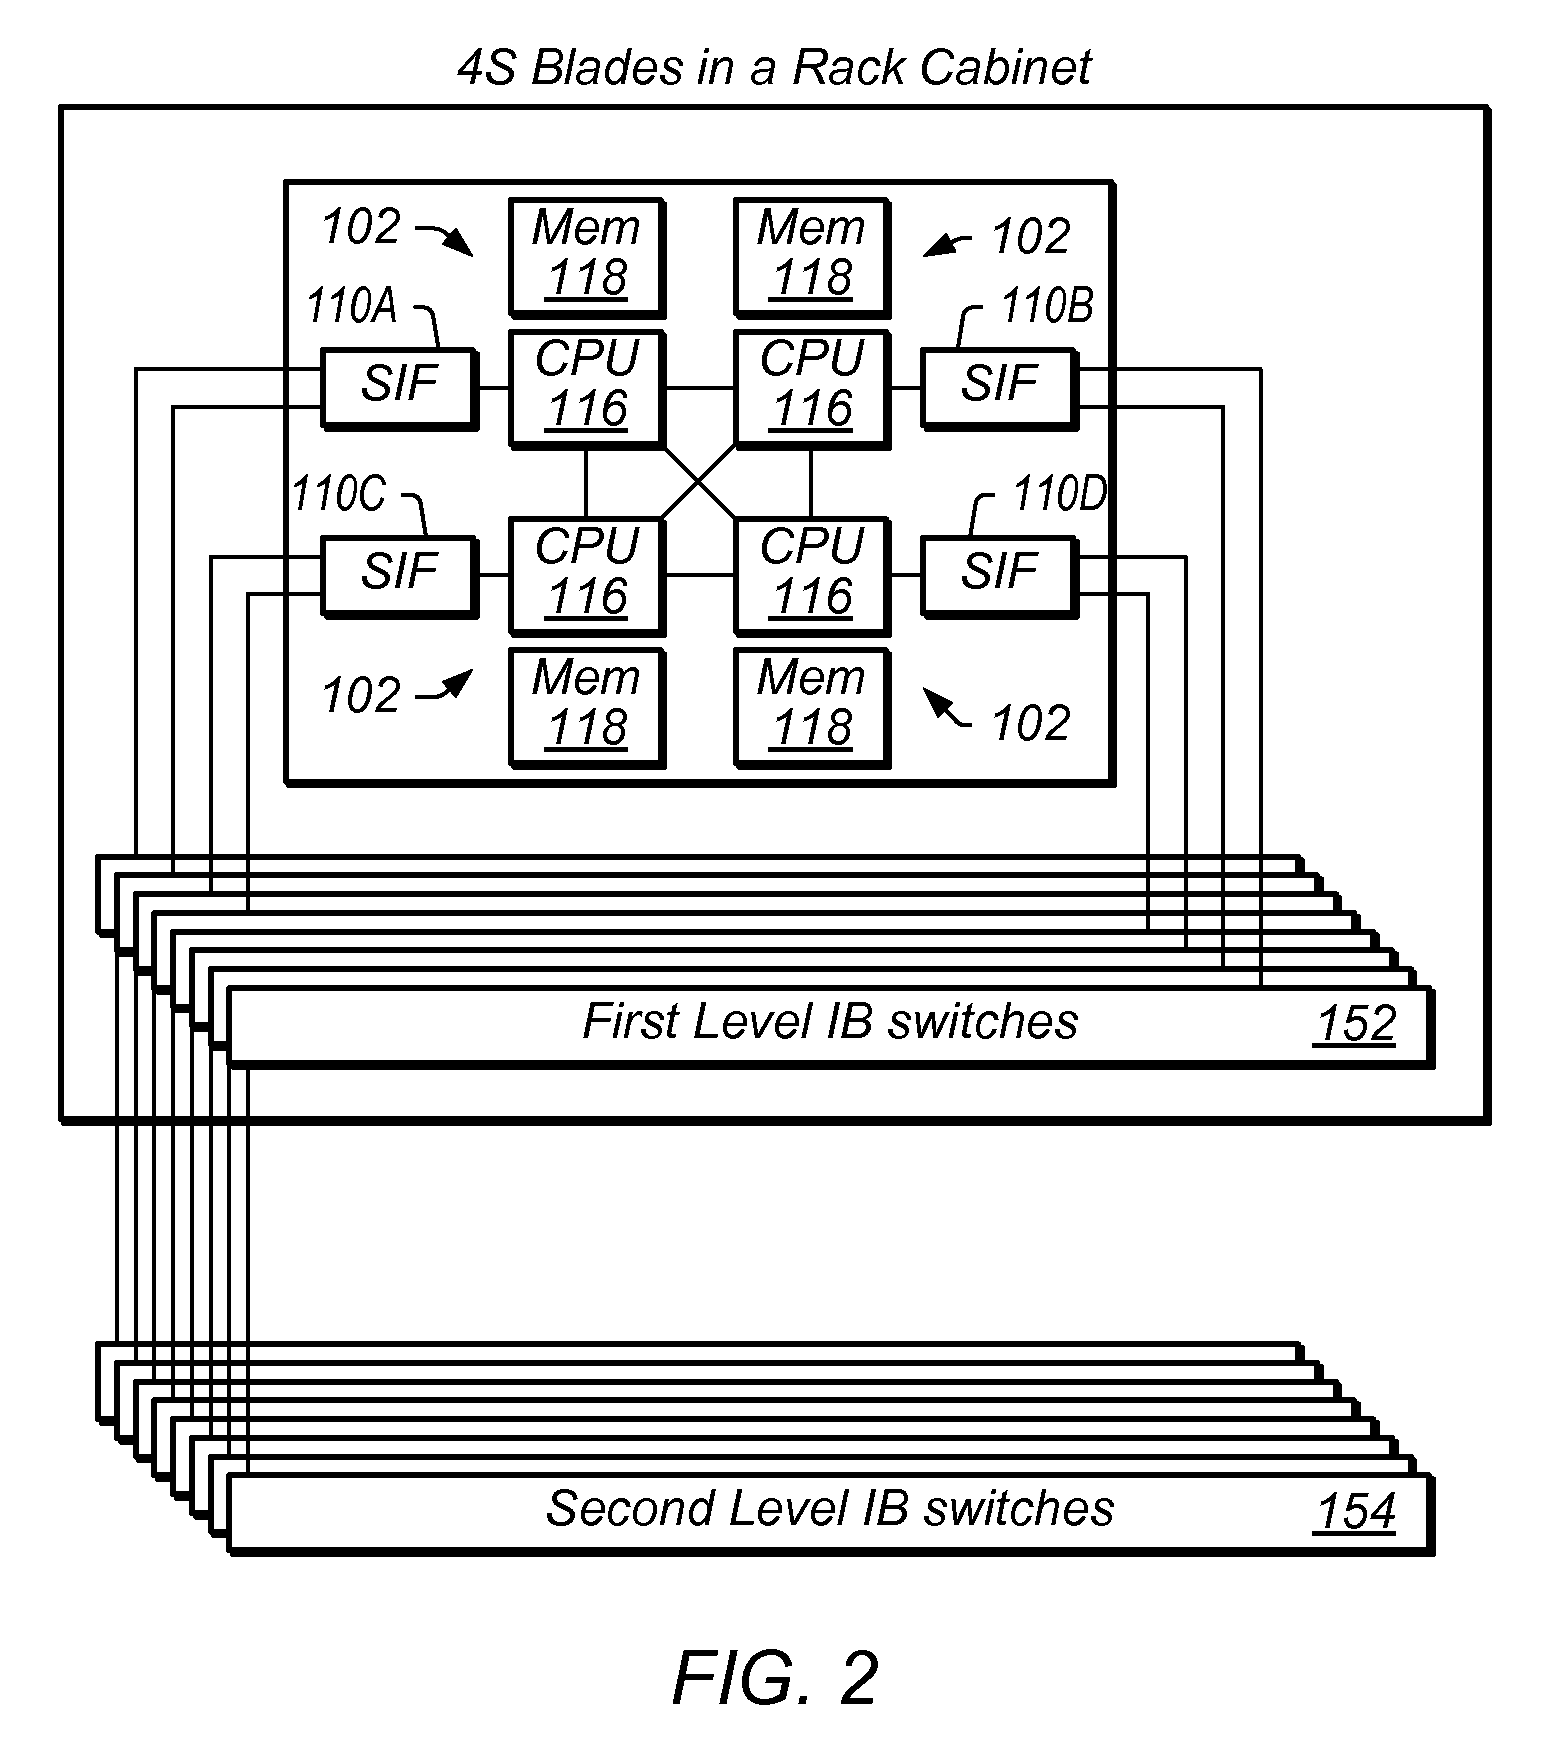 Caching Data in a Cluster Computing System Which Avoids False-Sharing Conflicts